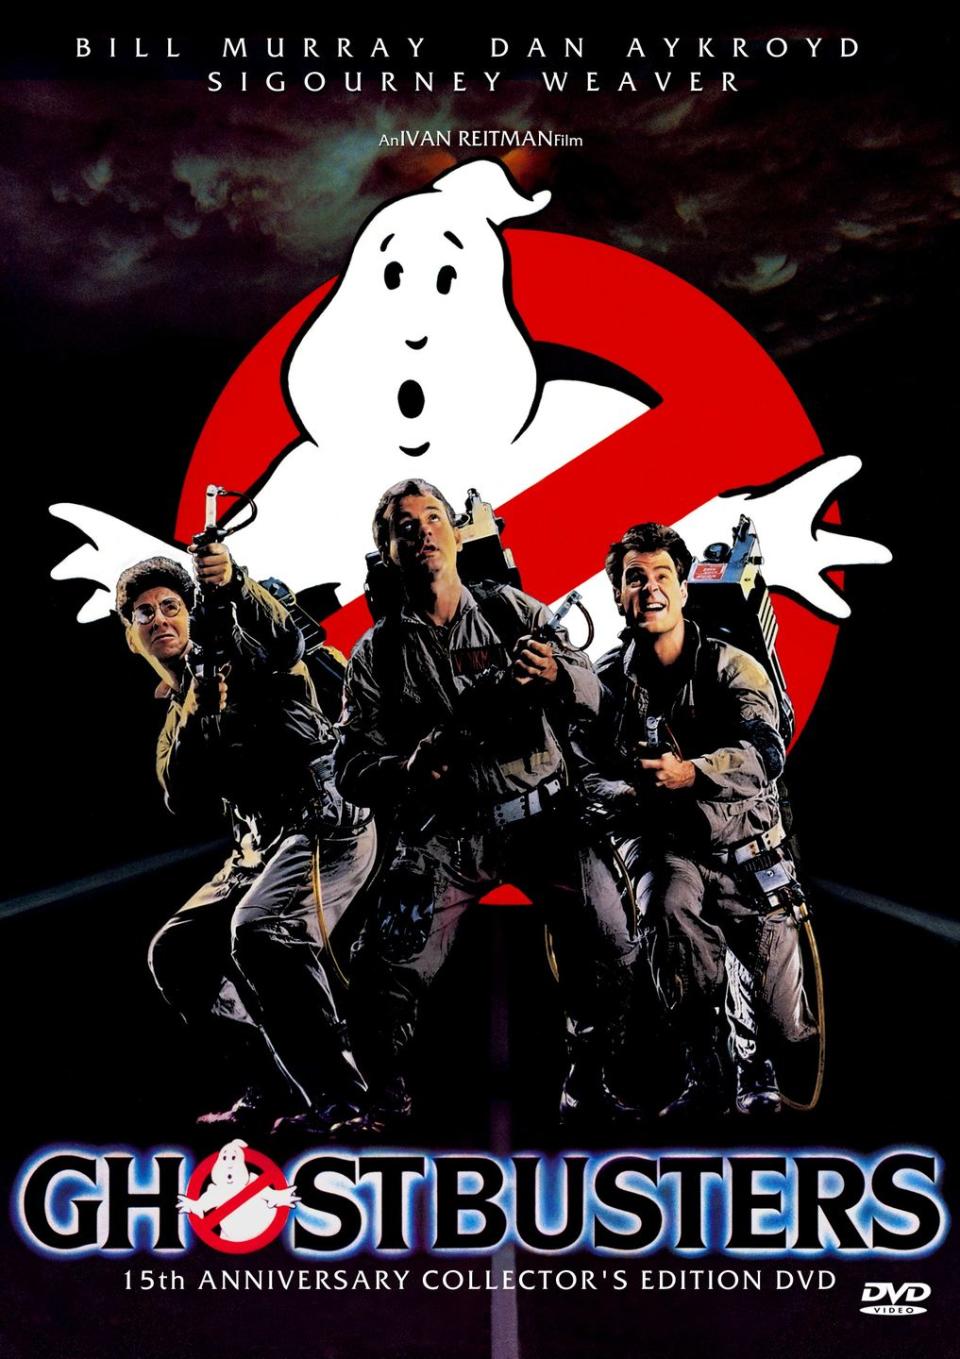 51) Ghostbusters (1984)